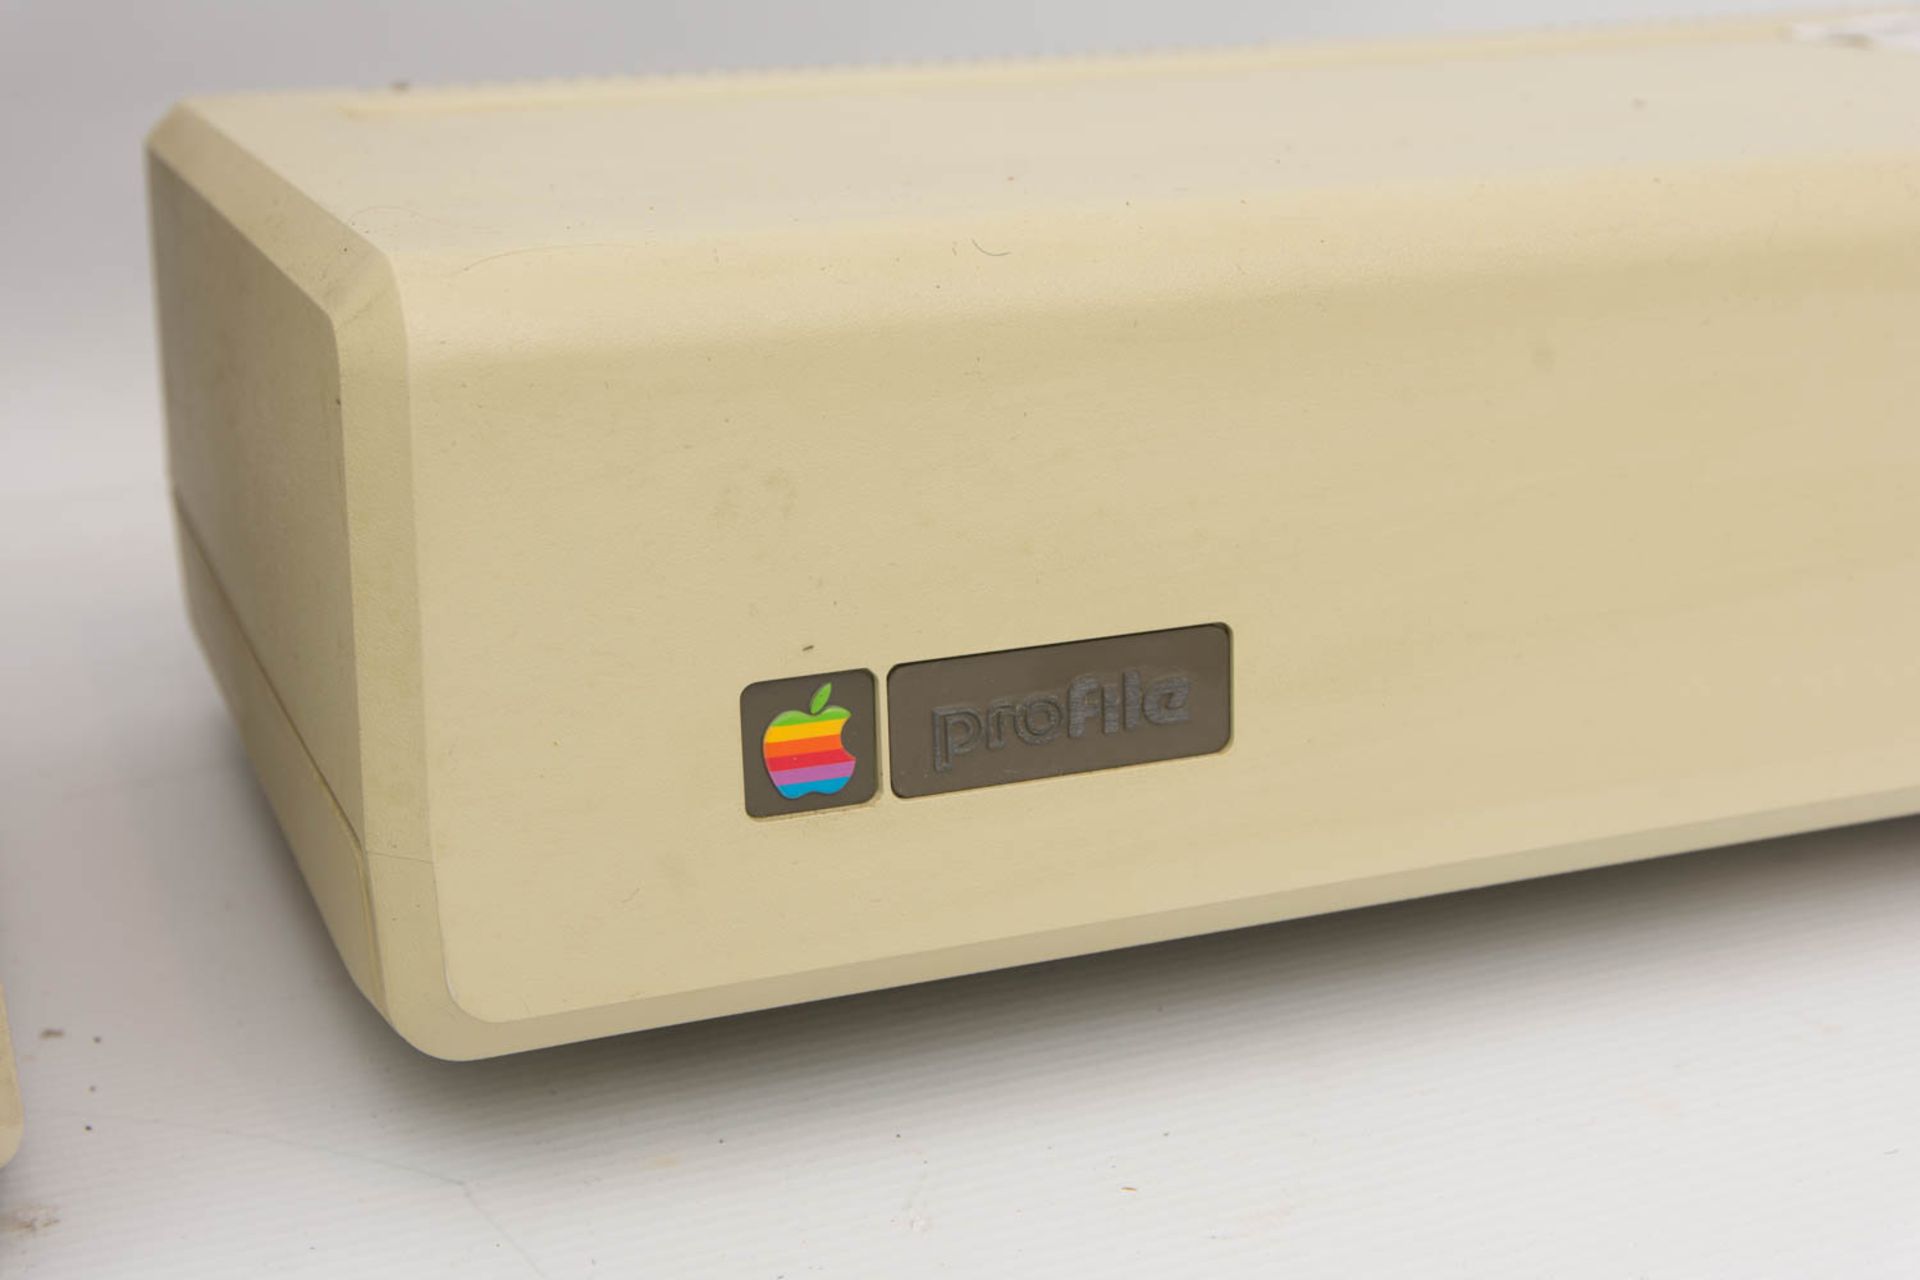 APPLE COMPUTER PRO FILE, Model Number A9M1005, Made in USA.Serien Nr. A9M1005-153596.43 x 22 x 9 cm - Image 2 of 5